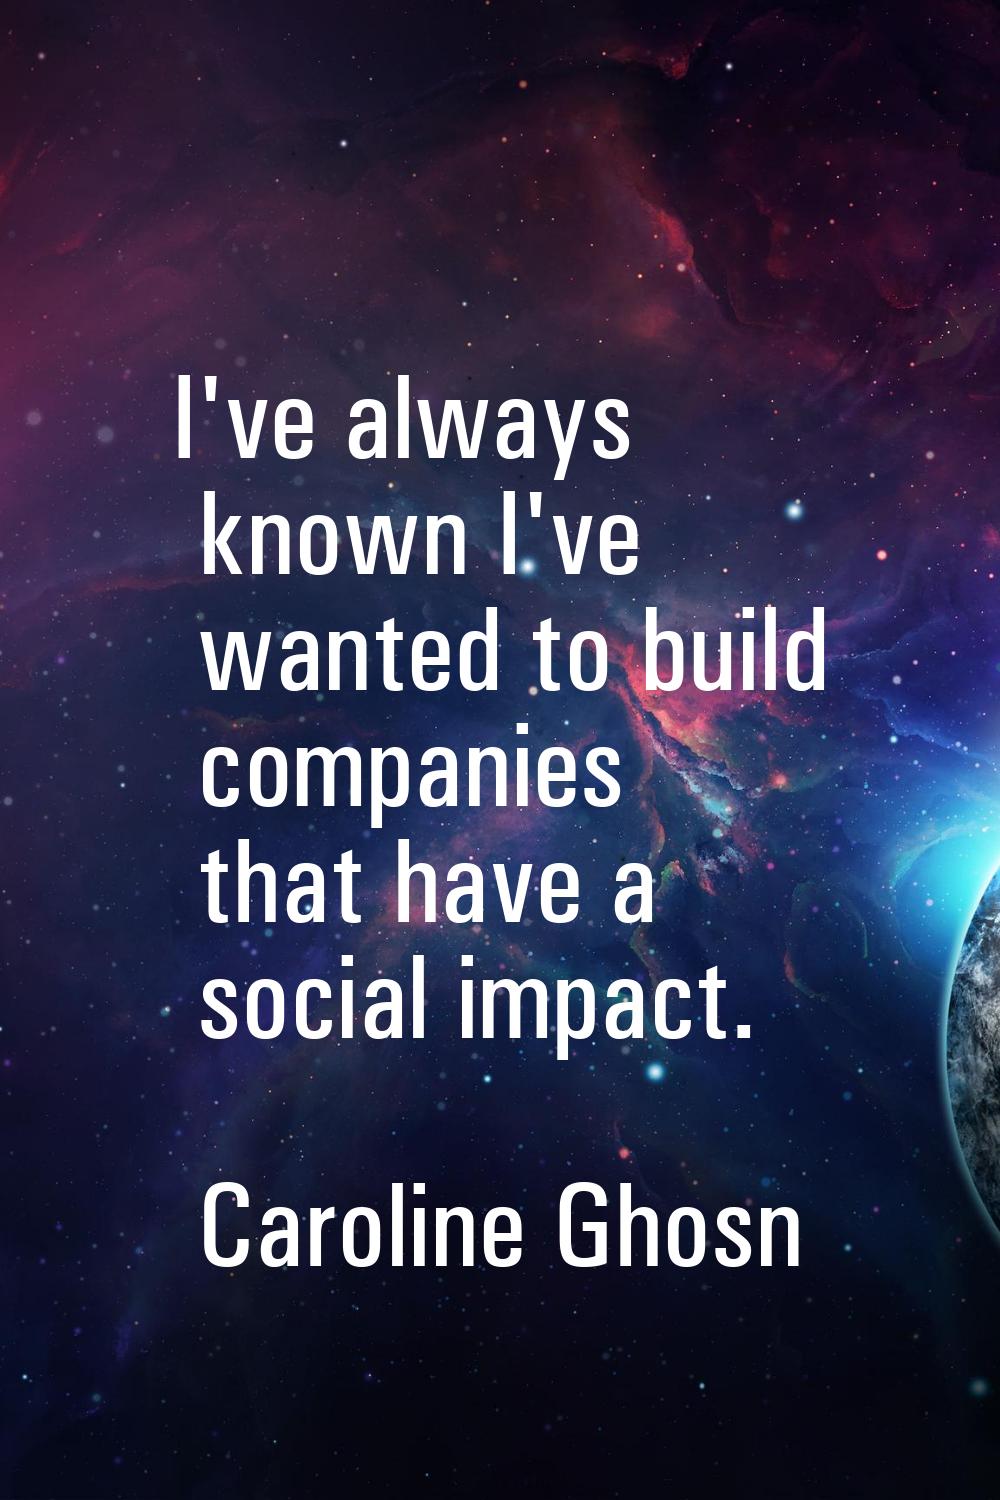 I've always known I've wanted to build companies that have a social impact.